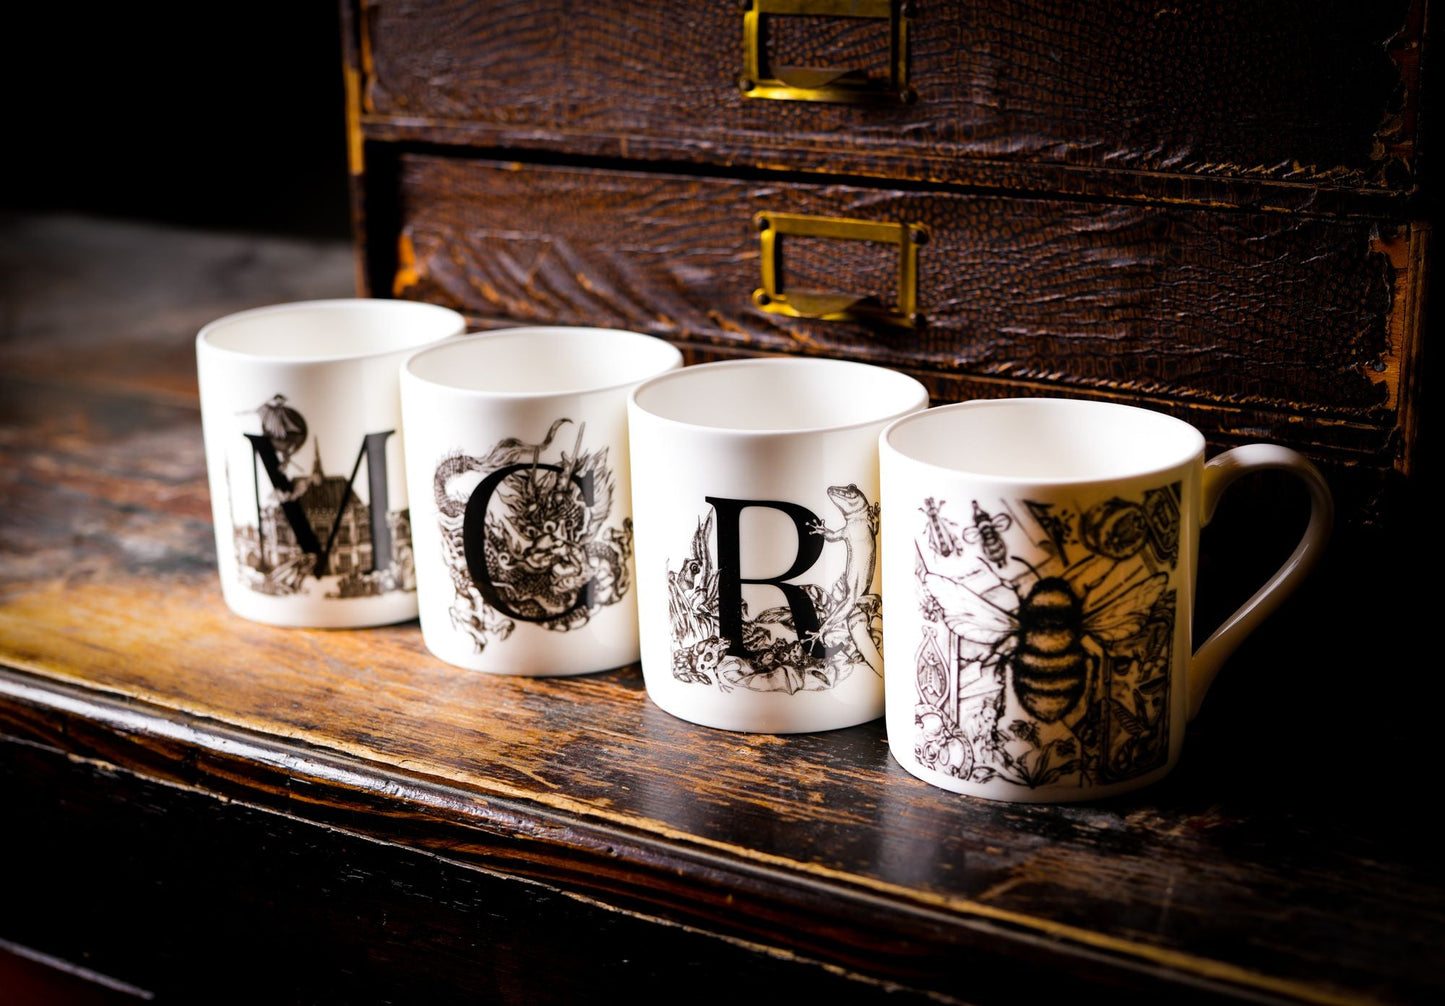 Lifestyle shot of the full mug set from the Sculpts. The four mugs spell out MCR and have the bee mug on the right nearest the viewer. The mugs are standing ona dark brown wooden surface with a brown old file holder behind.